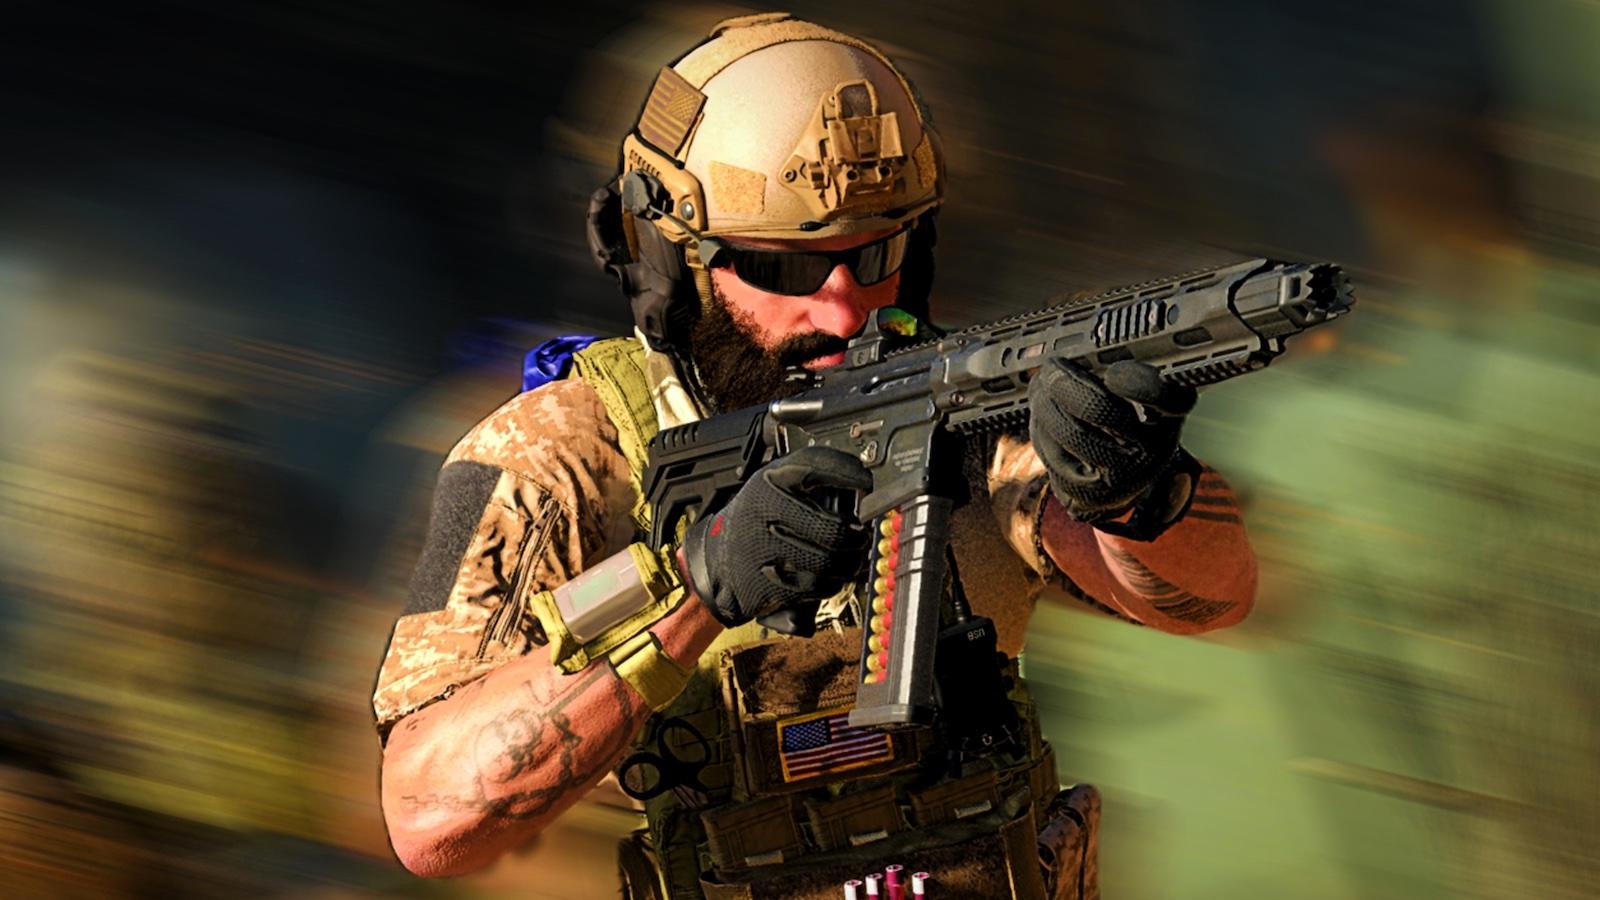 MW3 soldier carrying gun with background blurred